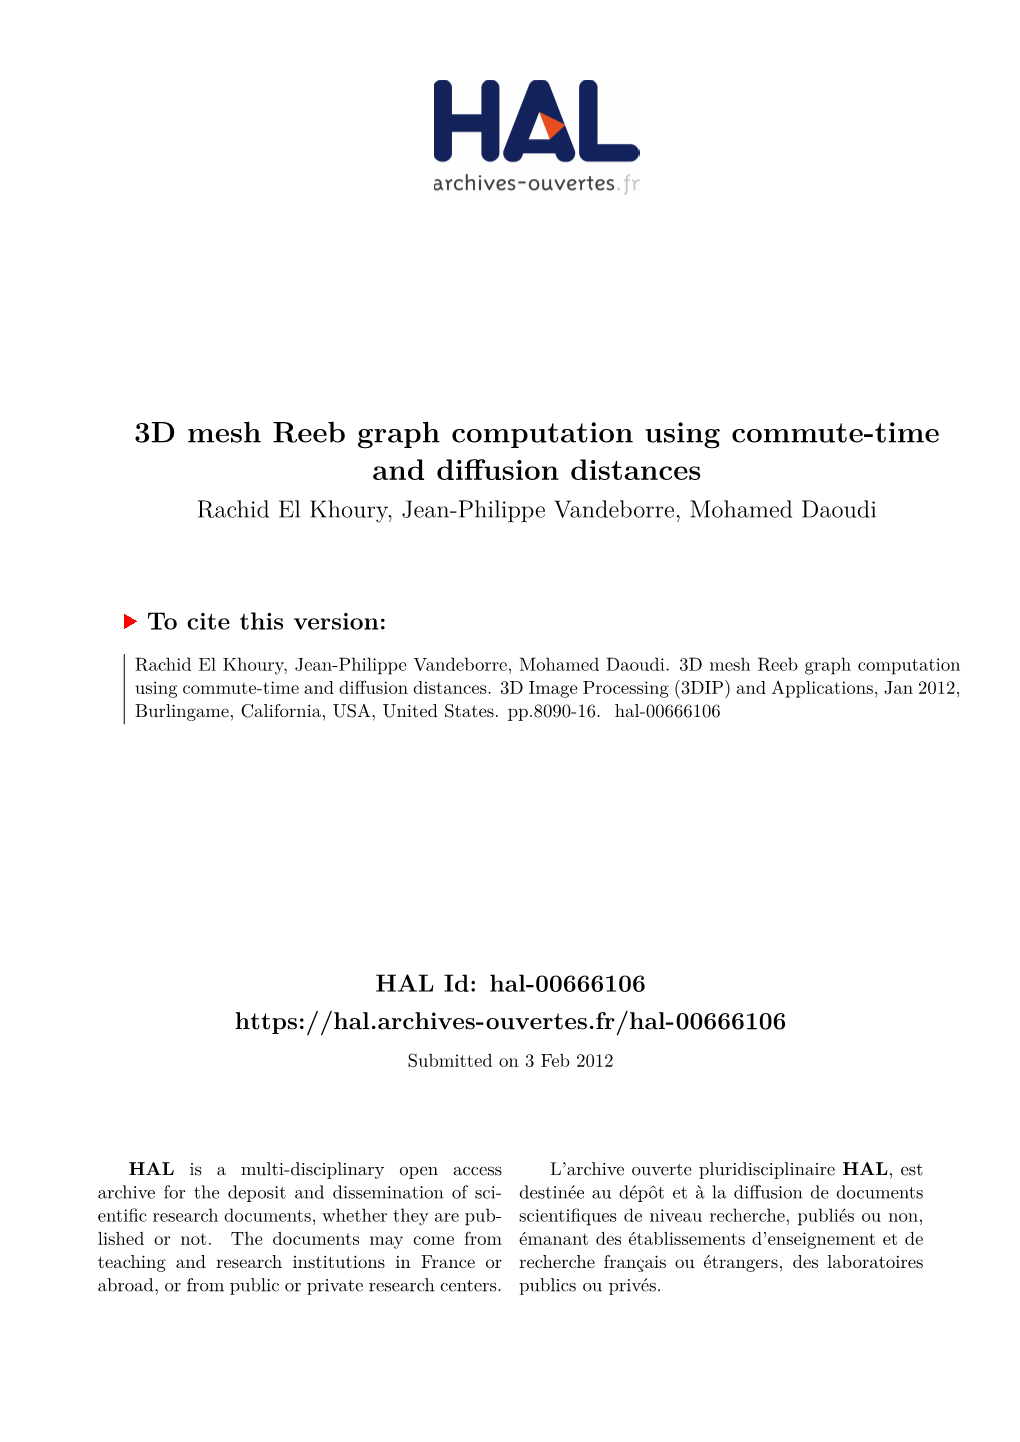 3D Mesh Reeb Graph Computation Using Commute-Time and Diffusion Distances Rachid El Khoury, Jean-Philippe Vandeborre, Mohamed Daoudi